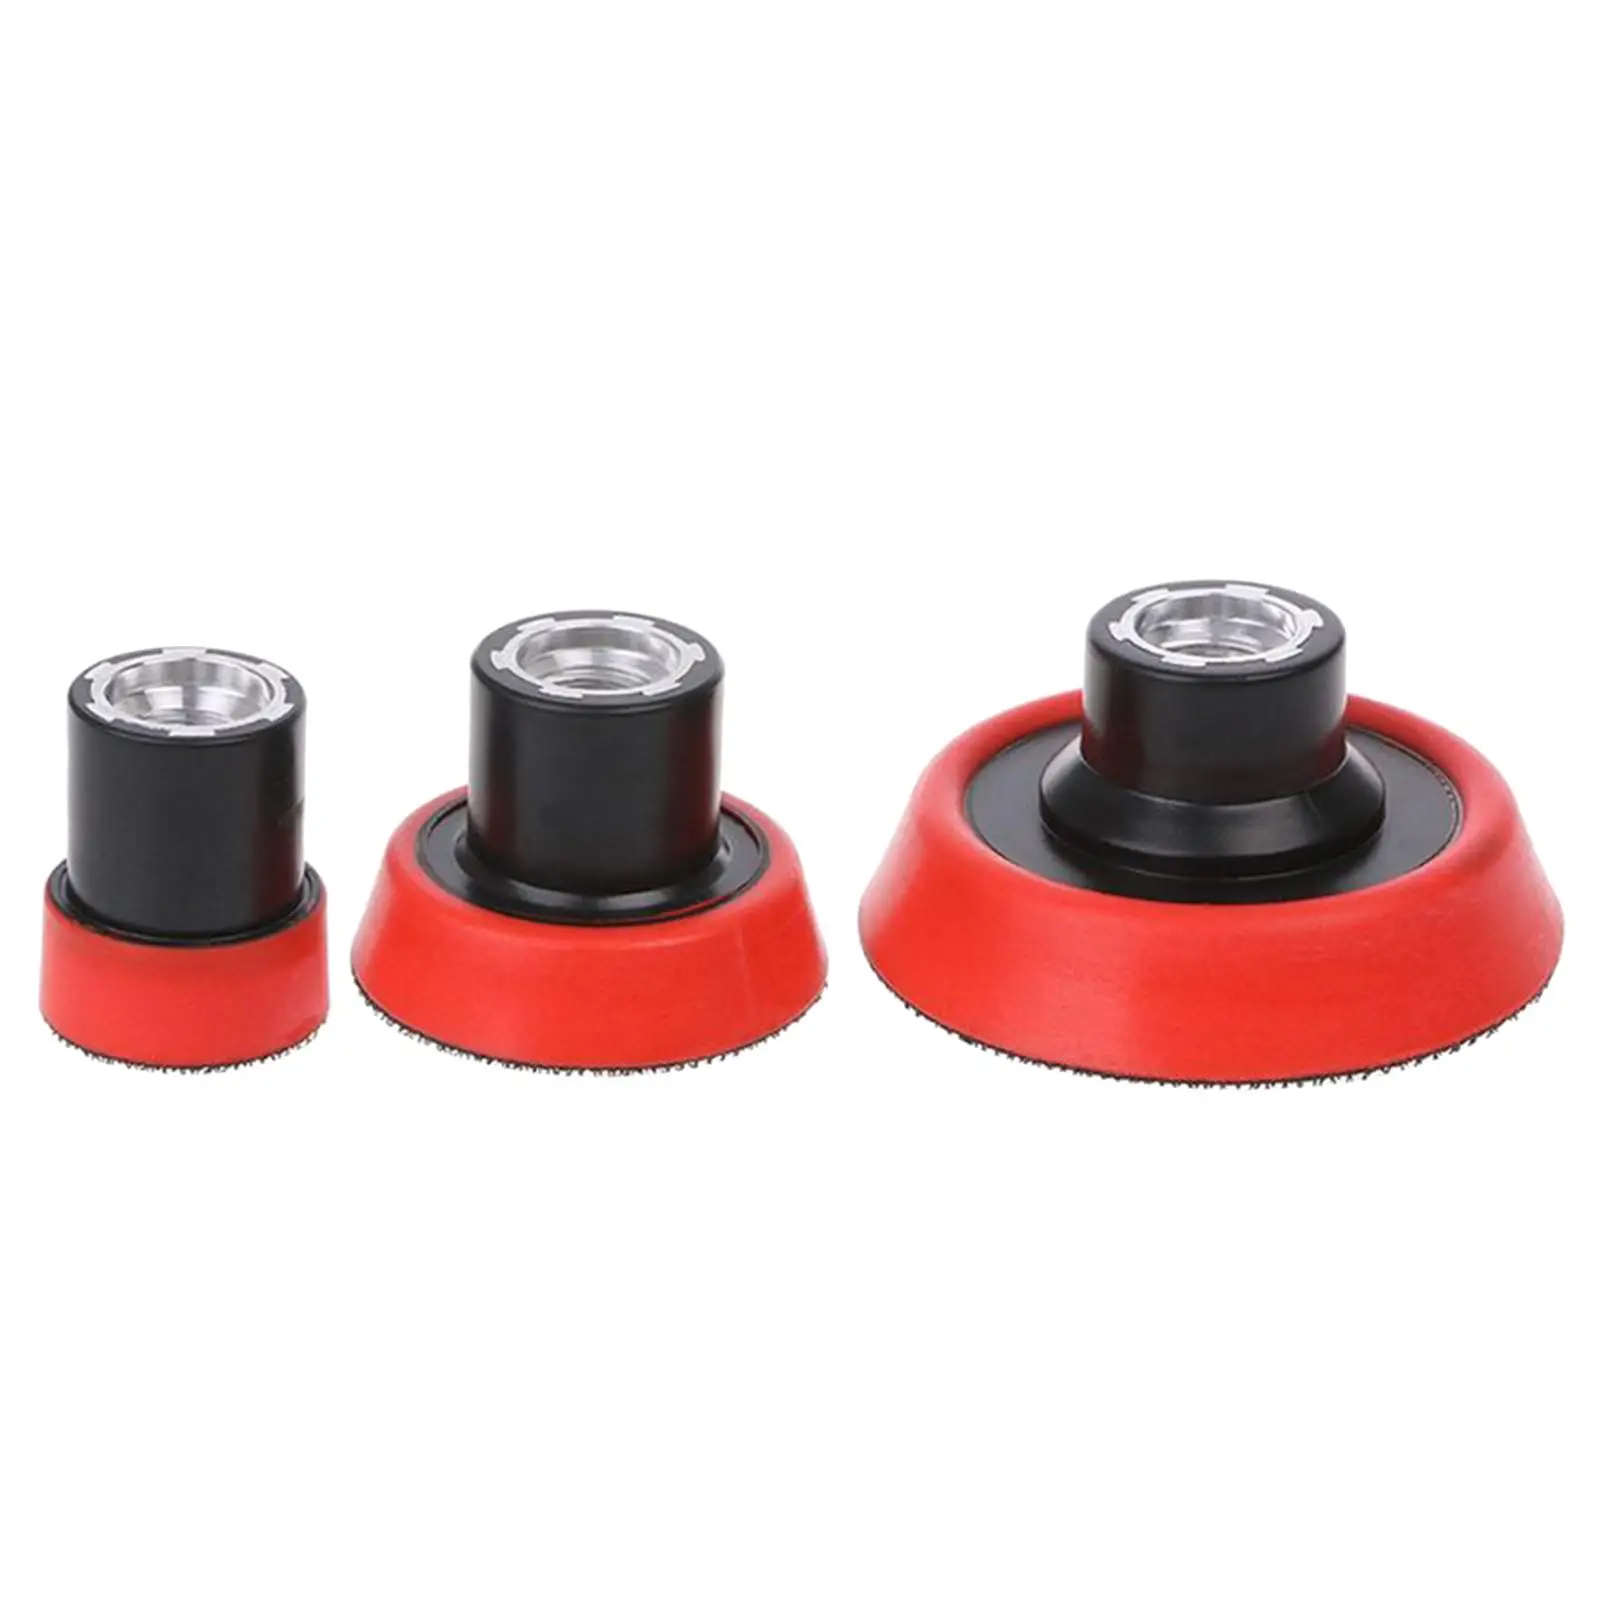 3 Pieces Backing Plate Accessories Backer Set Durable Tools M14 Polisher Angle Grinder for Polishing Car Care Detailing Car Wash